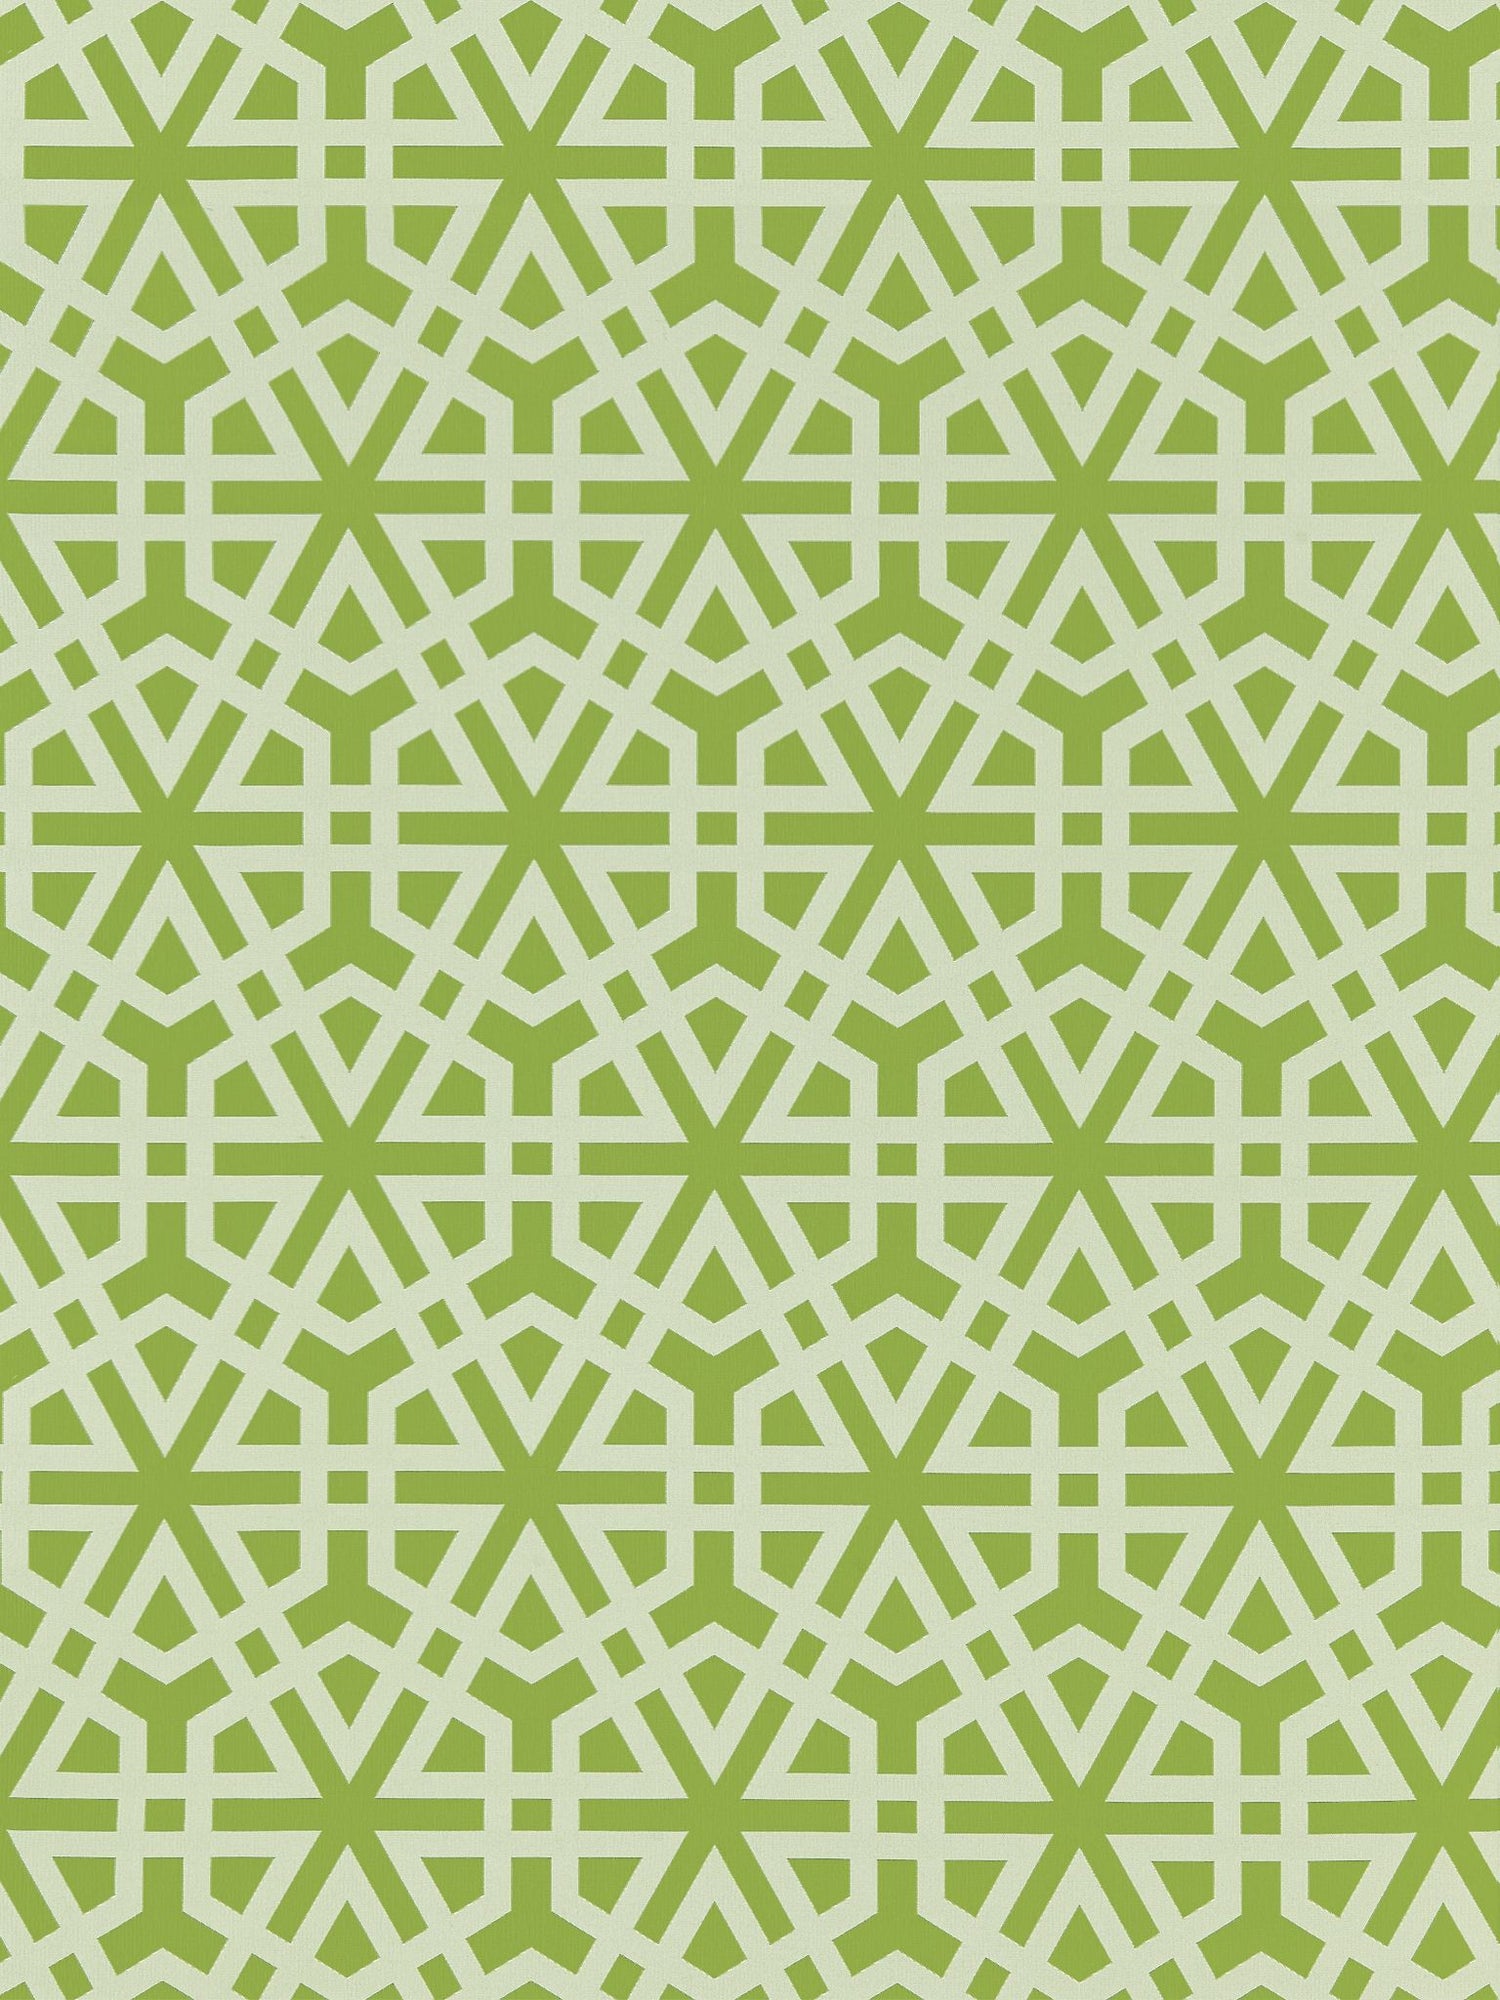 Lisbon Weave fabric in palm color - pattern number SC 000327198 - by Scalamandre in the Scalamandre Fabrics Book 1 collection